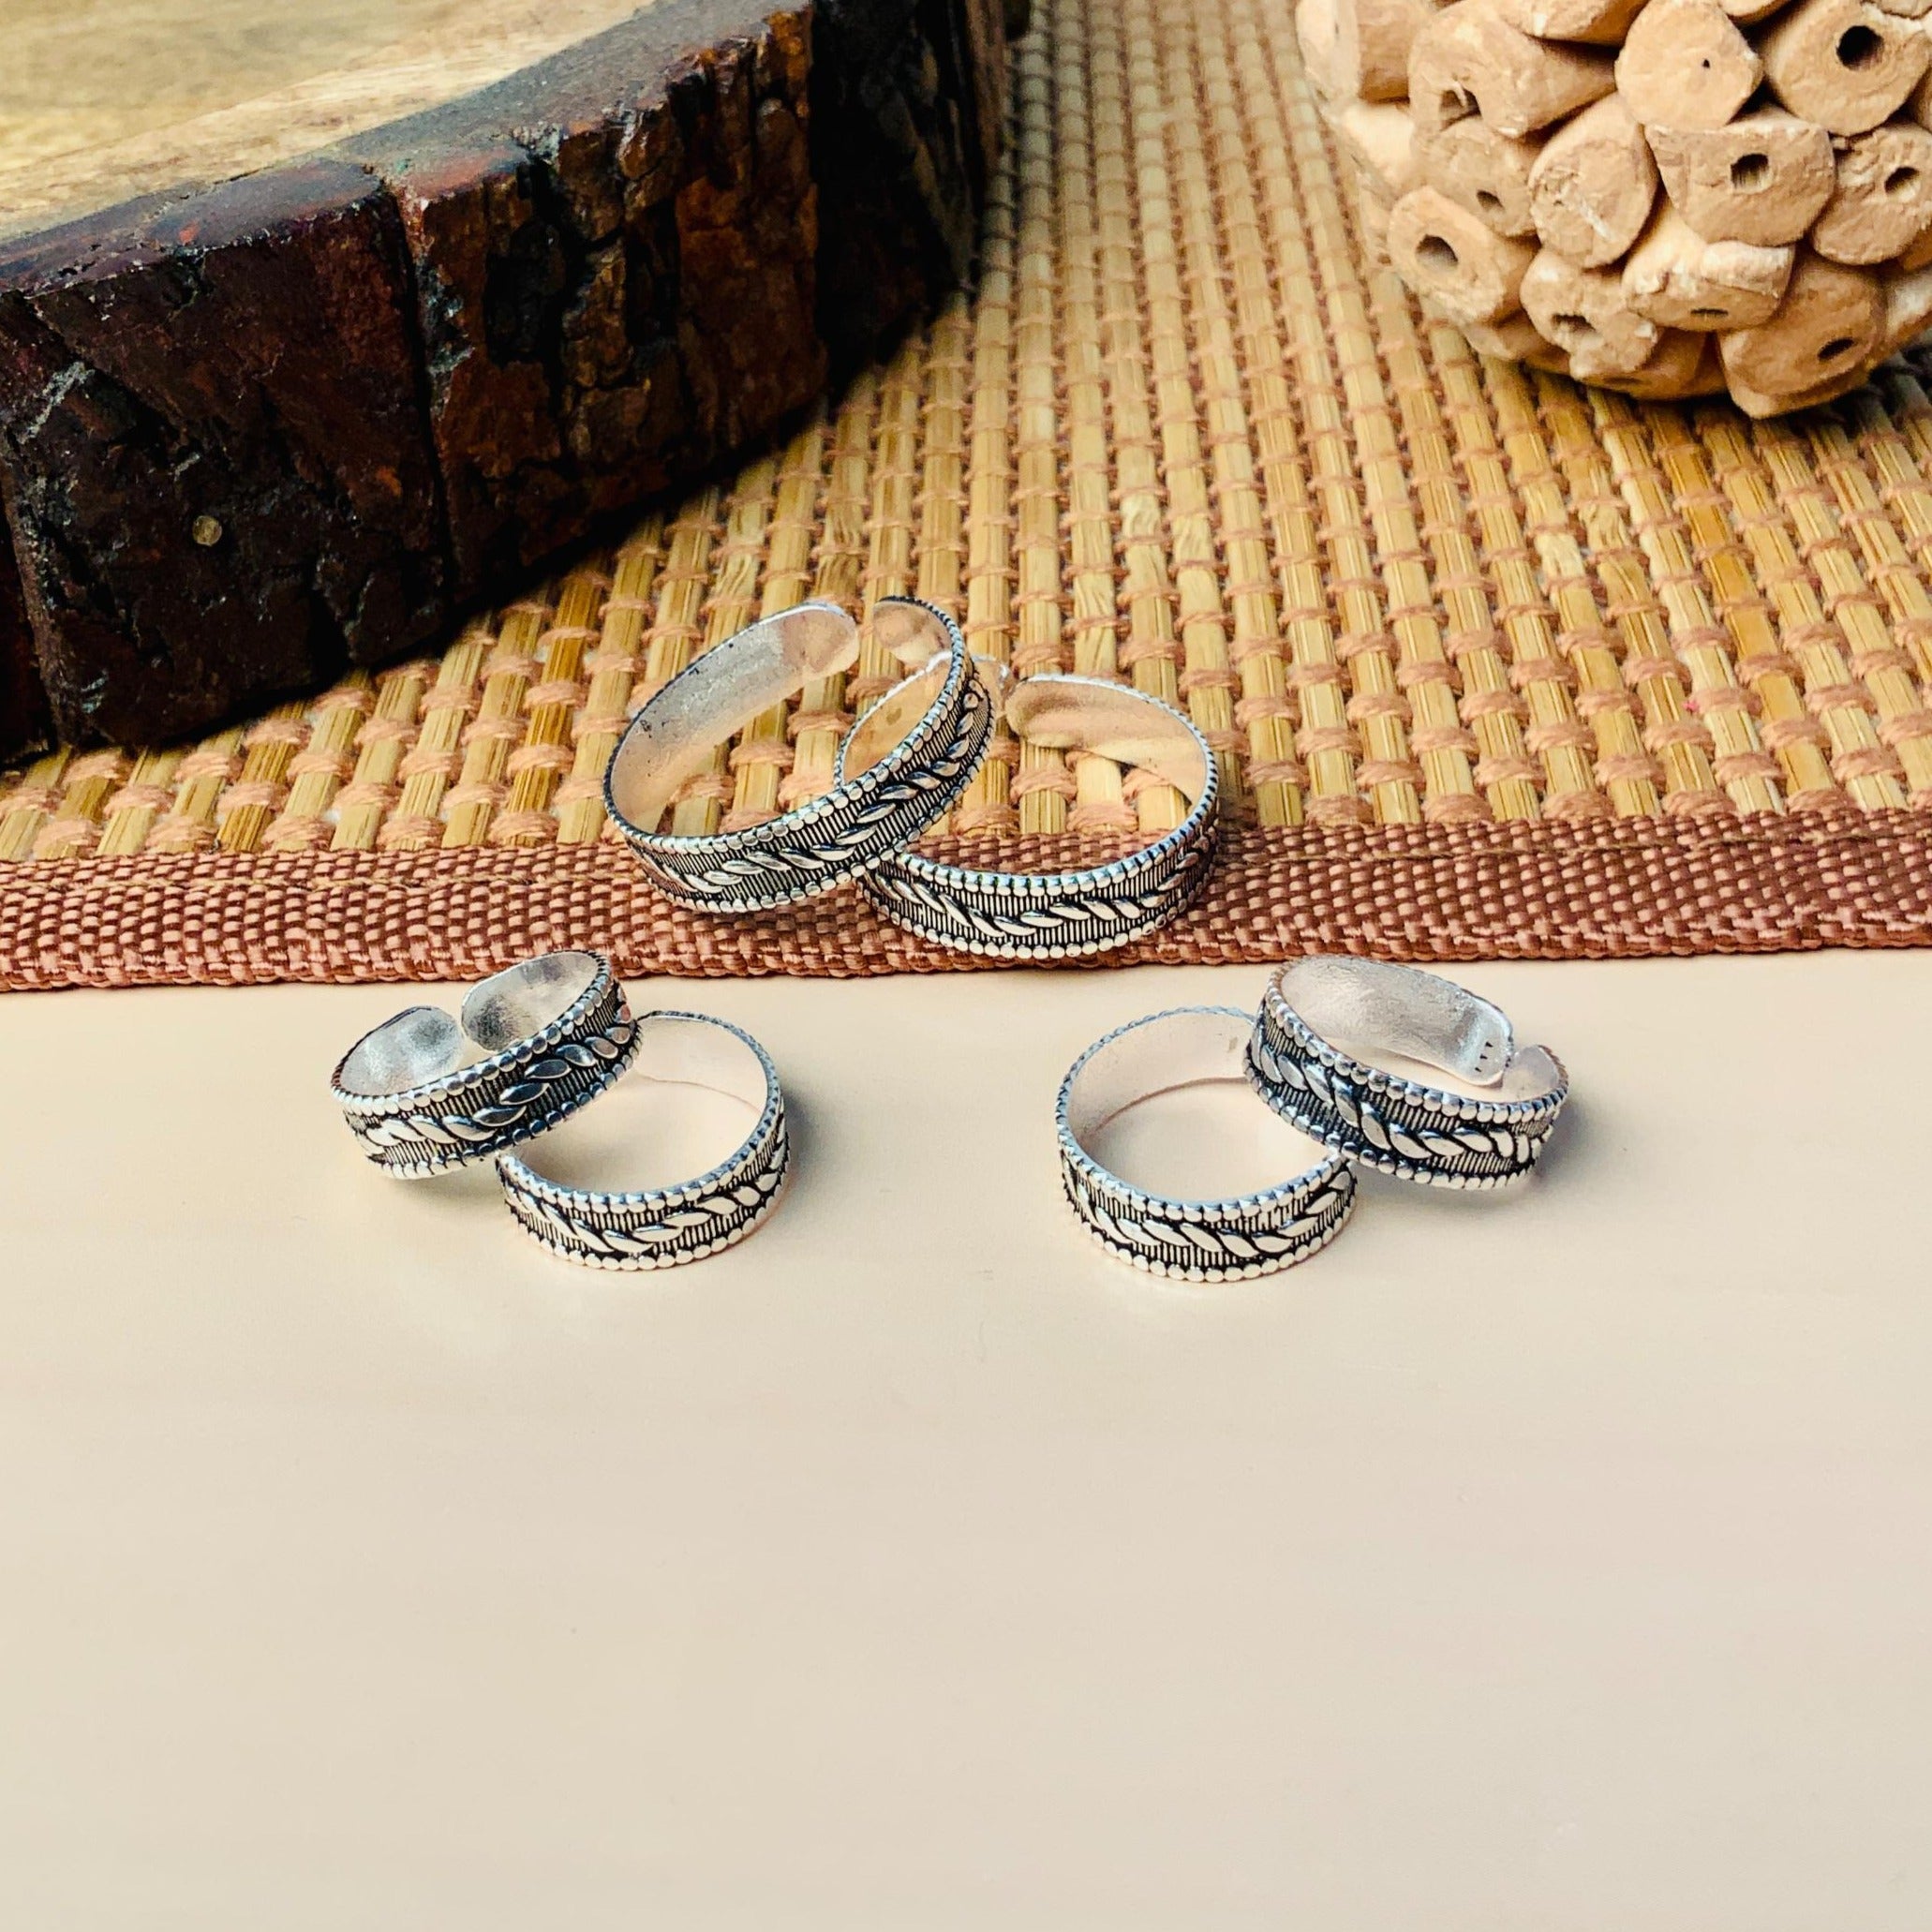 Bollywood Trending Oxidized Silver Plated Adjustable Ring Fashion Jewelry  Women Gift Idea, 2 Piece Set Free Shipping -  Canada